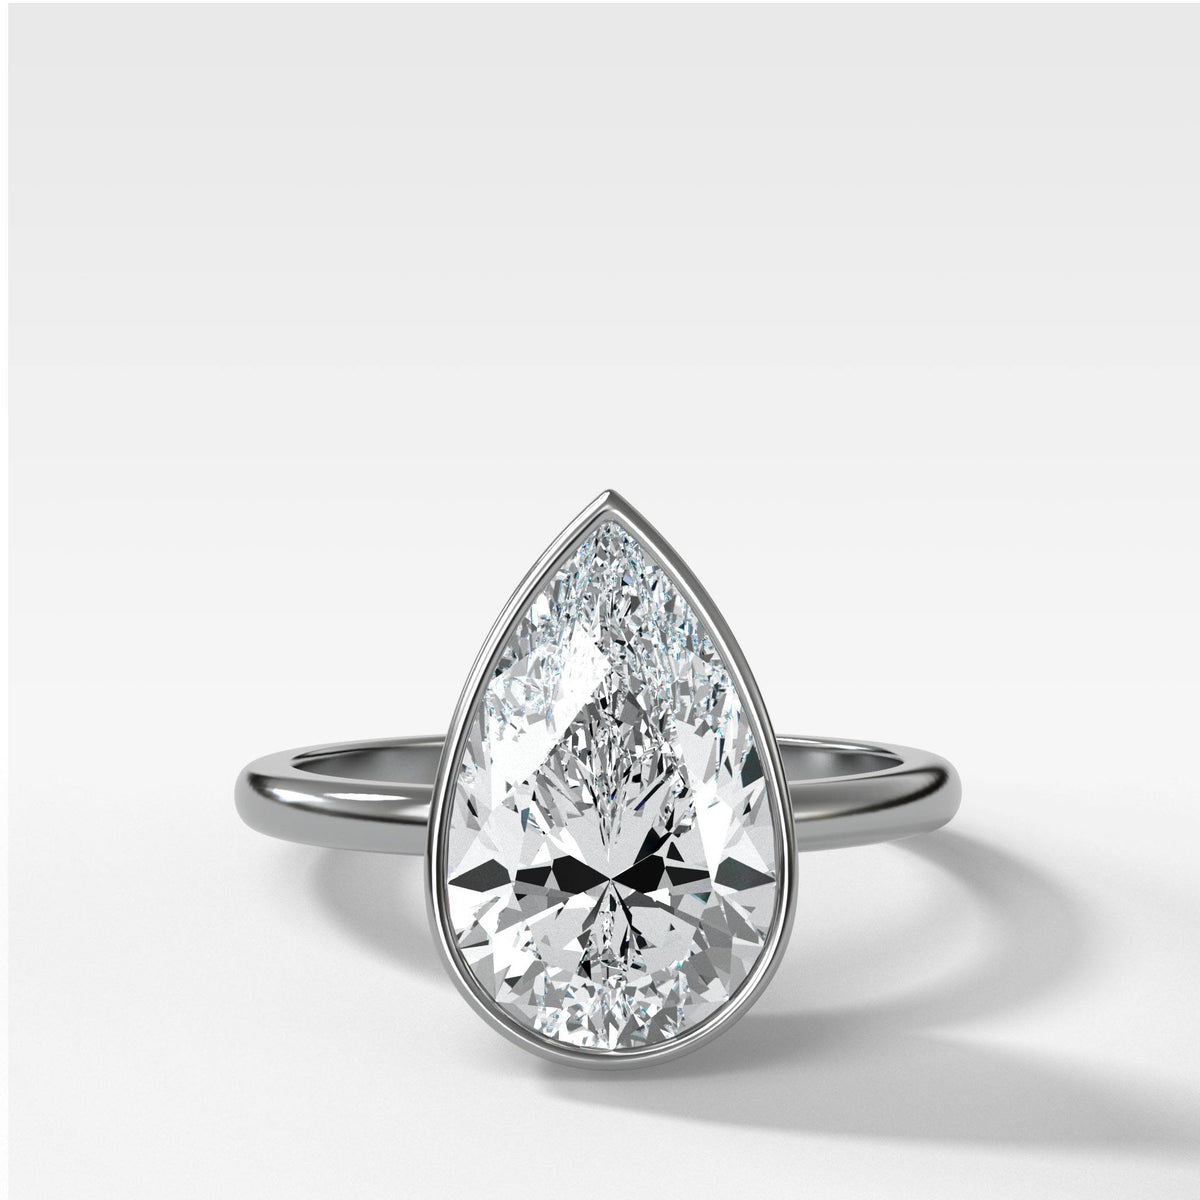 Bezel Penumbra Solitaire With Pear Cut by Good Stone in White Gold